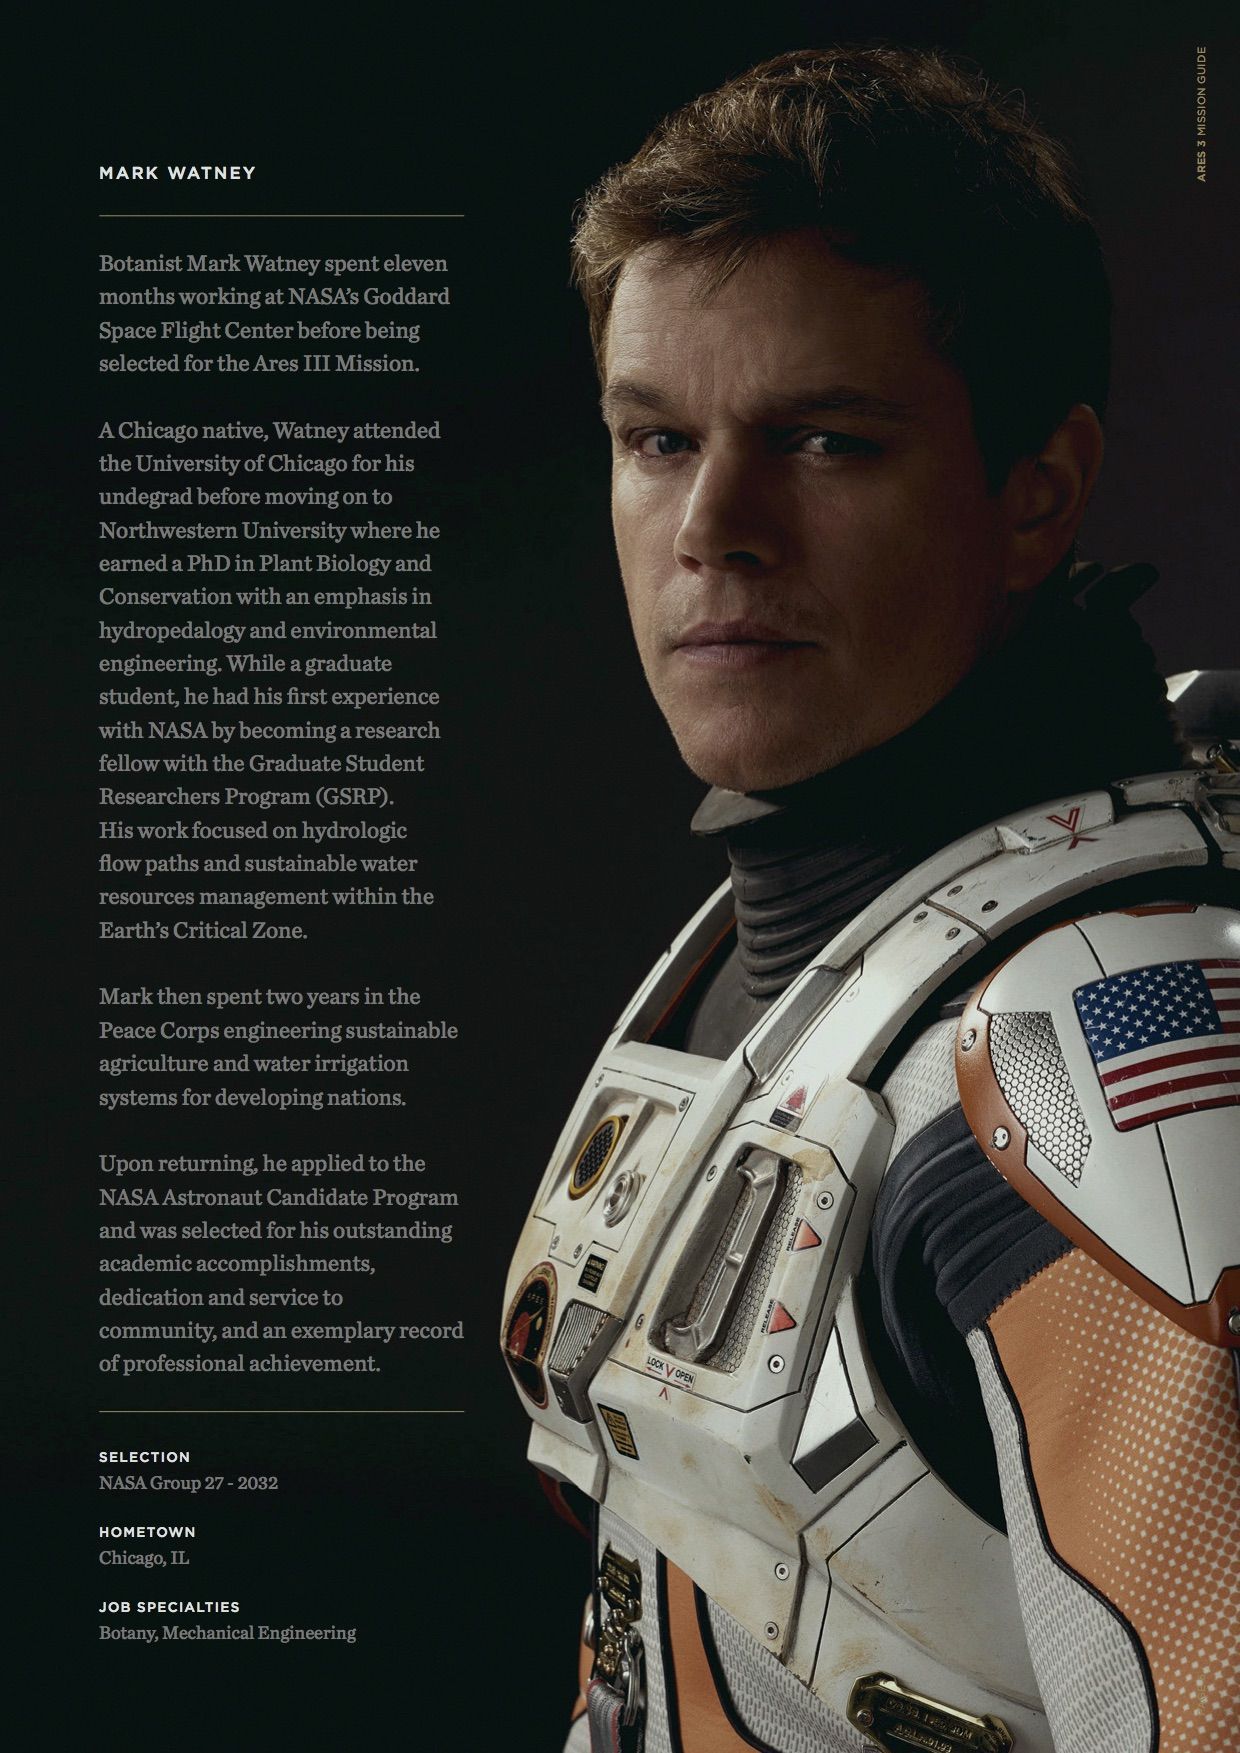 The Martian Mission Guide Biography Mark Watney